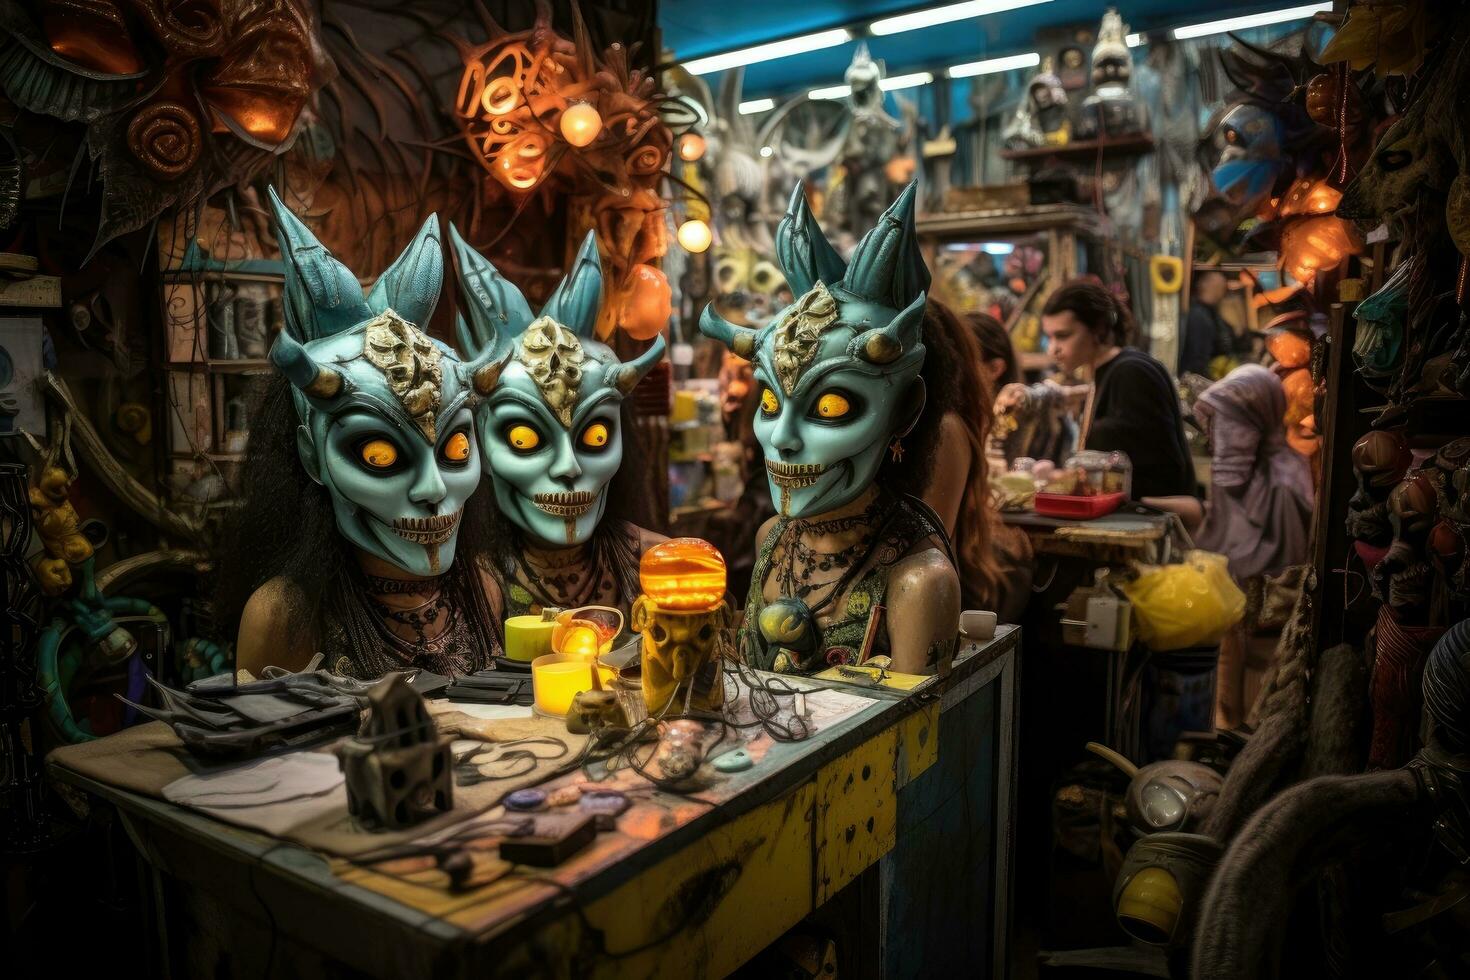 Unidentified people with mask at night market in Bangkok, Thailand. 3D Halloween costume shop, grotesque creatures that blend seamlessly with their costumes, AI Generated photo